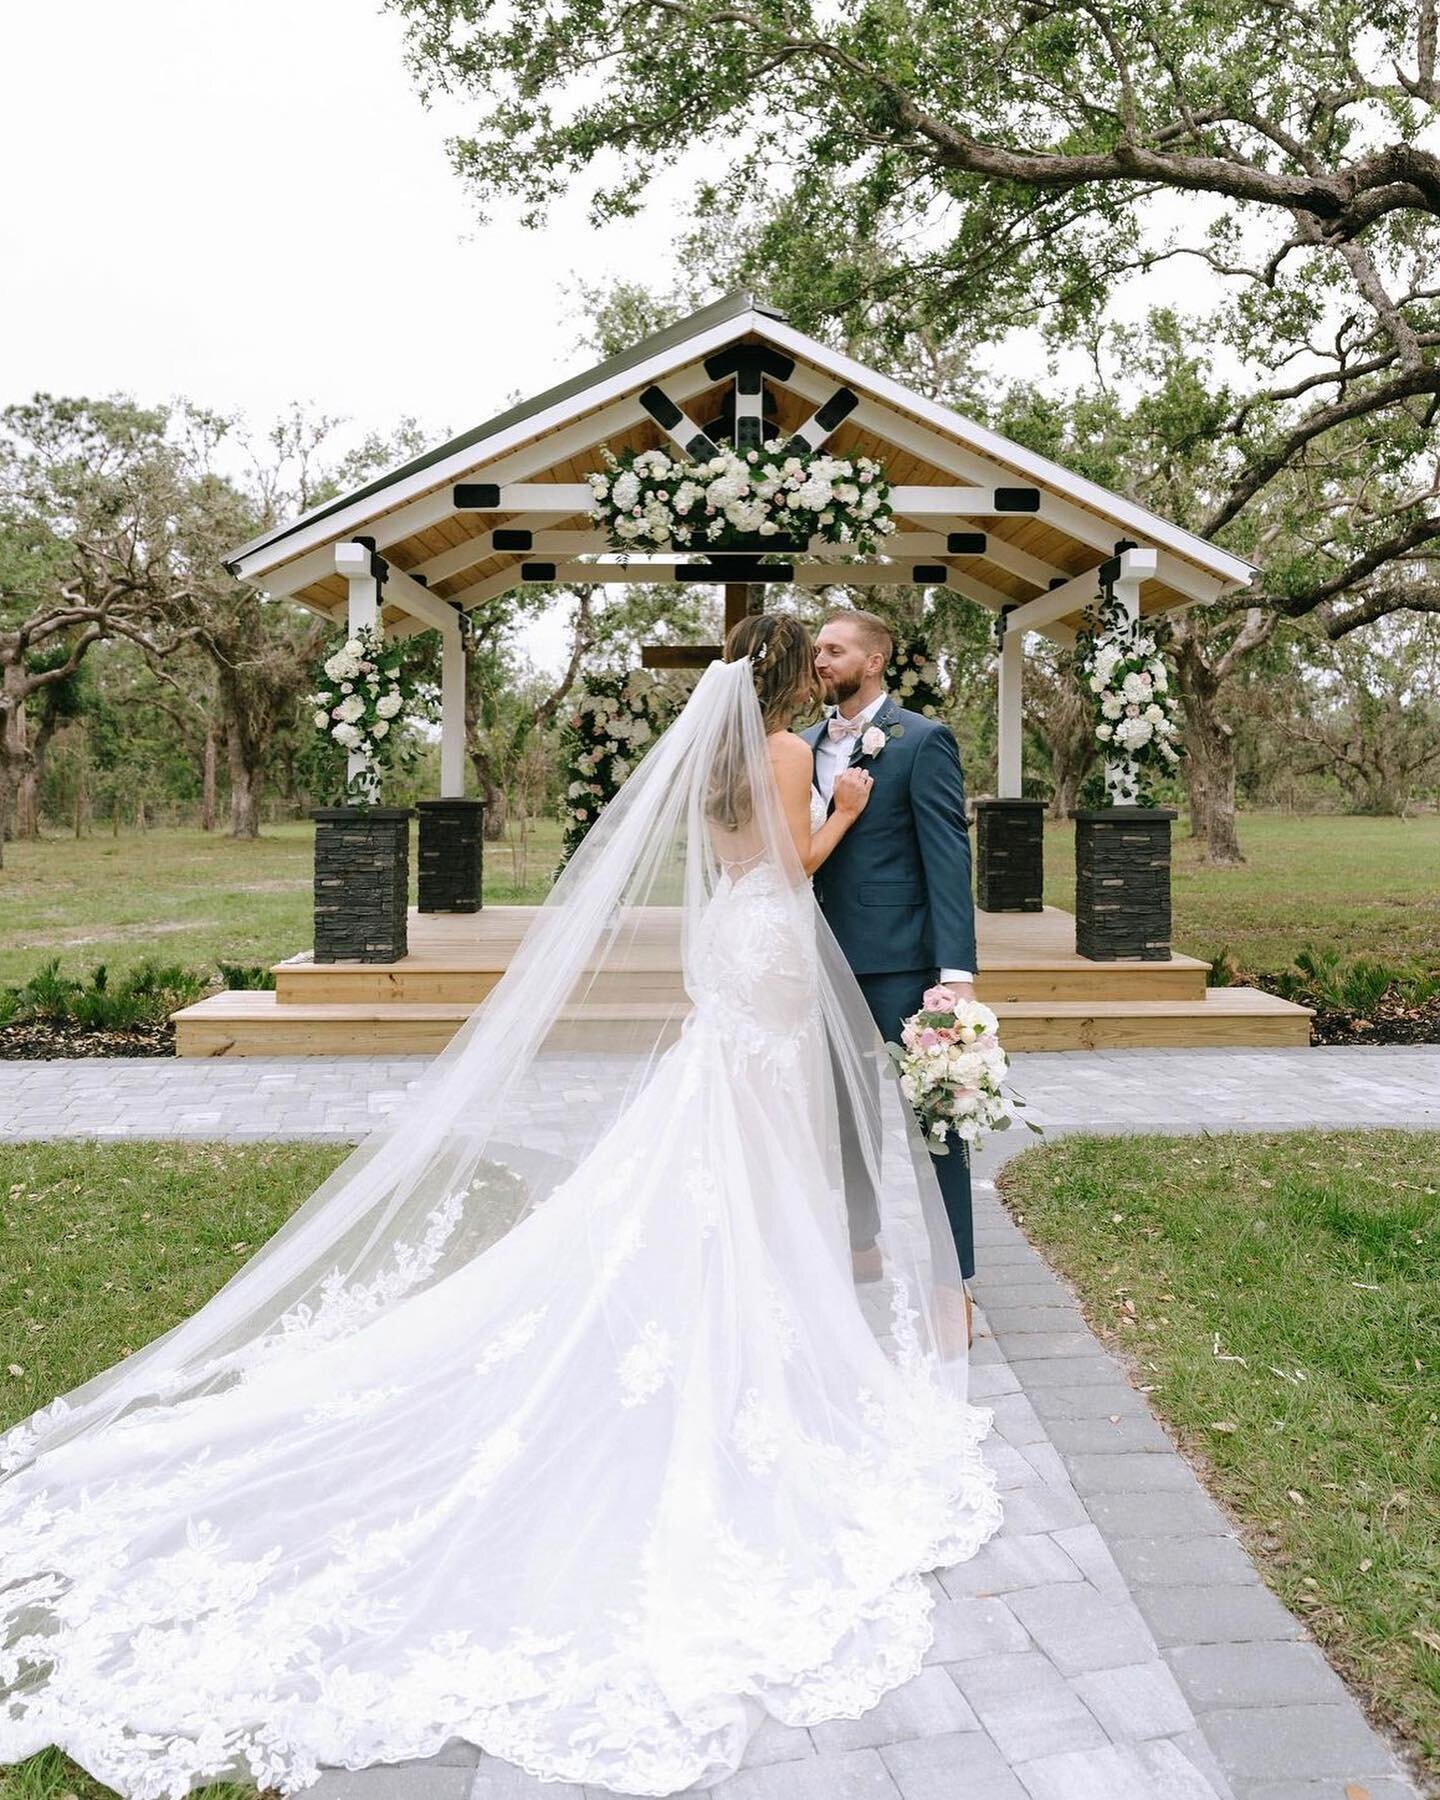 Nicole + Thomas💍🤍

What a beautiful and Godly couple that was able to get married here. The ceremony, reception, food, pictures, dancing, and everything in between was truly breathtaking!

Photos: @tiffanymaysonetphoto
Decor: @idewevents 
Floral: @